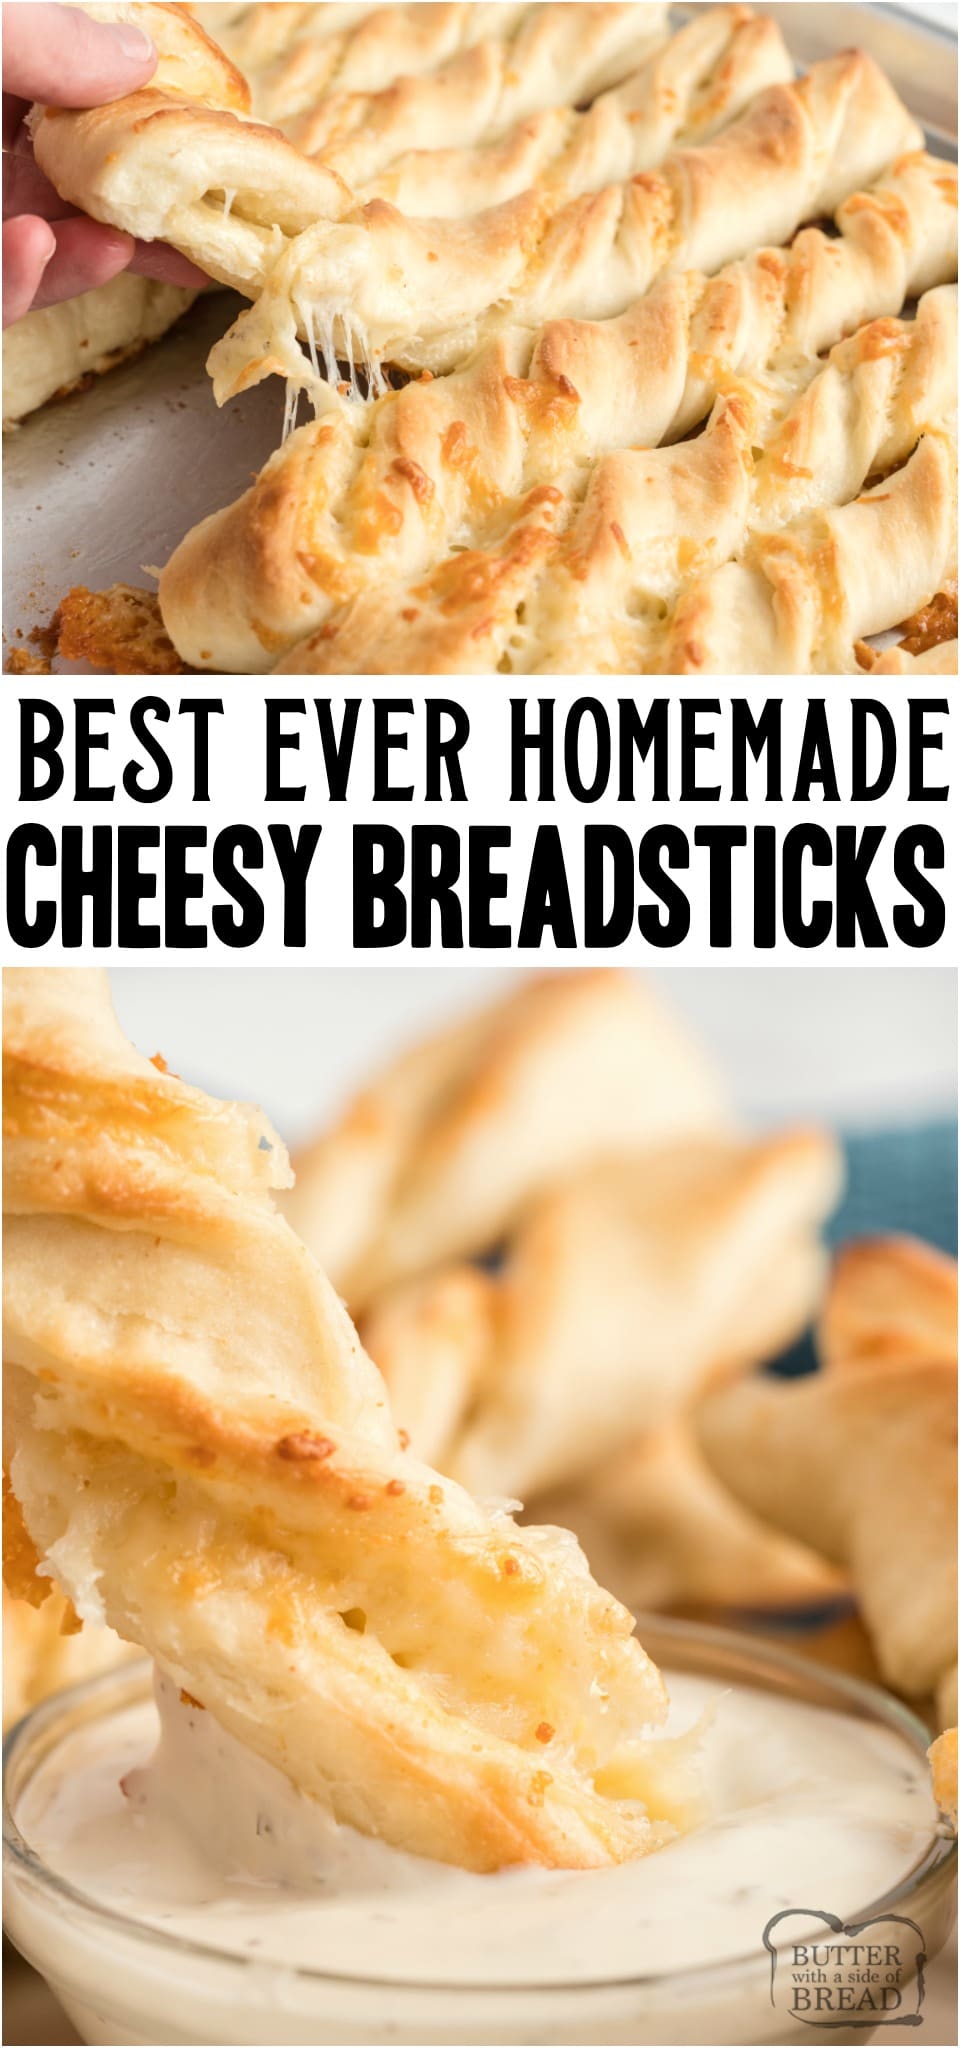 Cheesy breadsticks are a delicious side to a meal and these soft and buttery breadsticks with cheese inside can be made in under an hour! #bread #homemade #cheese #breadsticks #baking #recipe from BUTTER WITH A SIDE OF BREAD